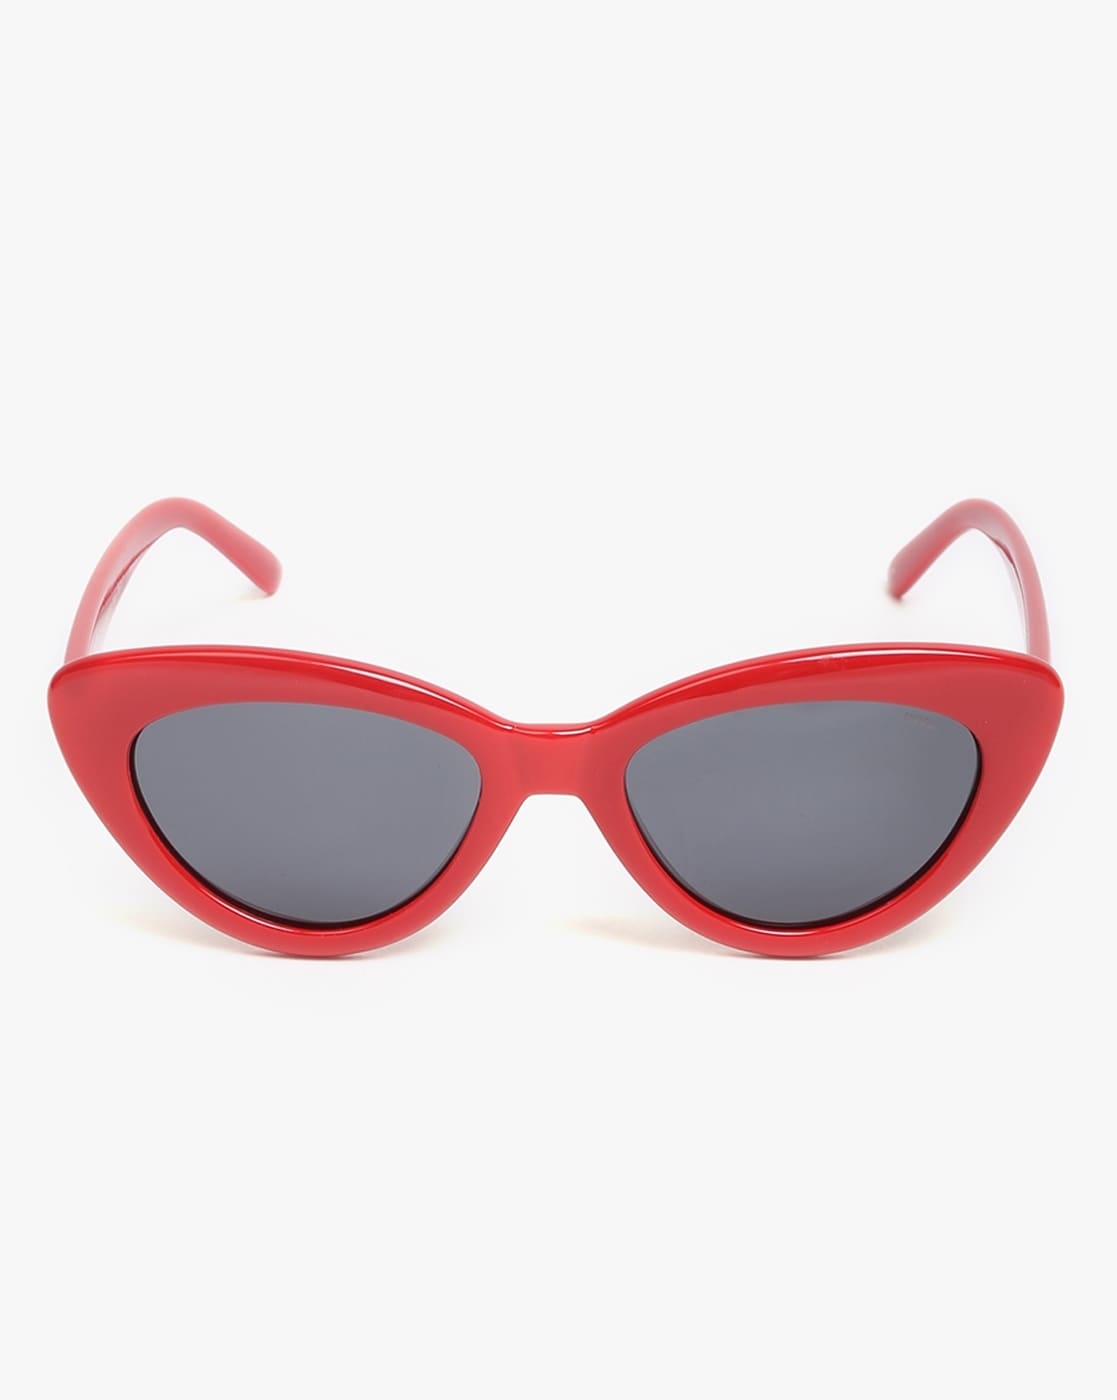 Red Plastic Rimless Sunglasses, 5.5in x 2.2in | Party City